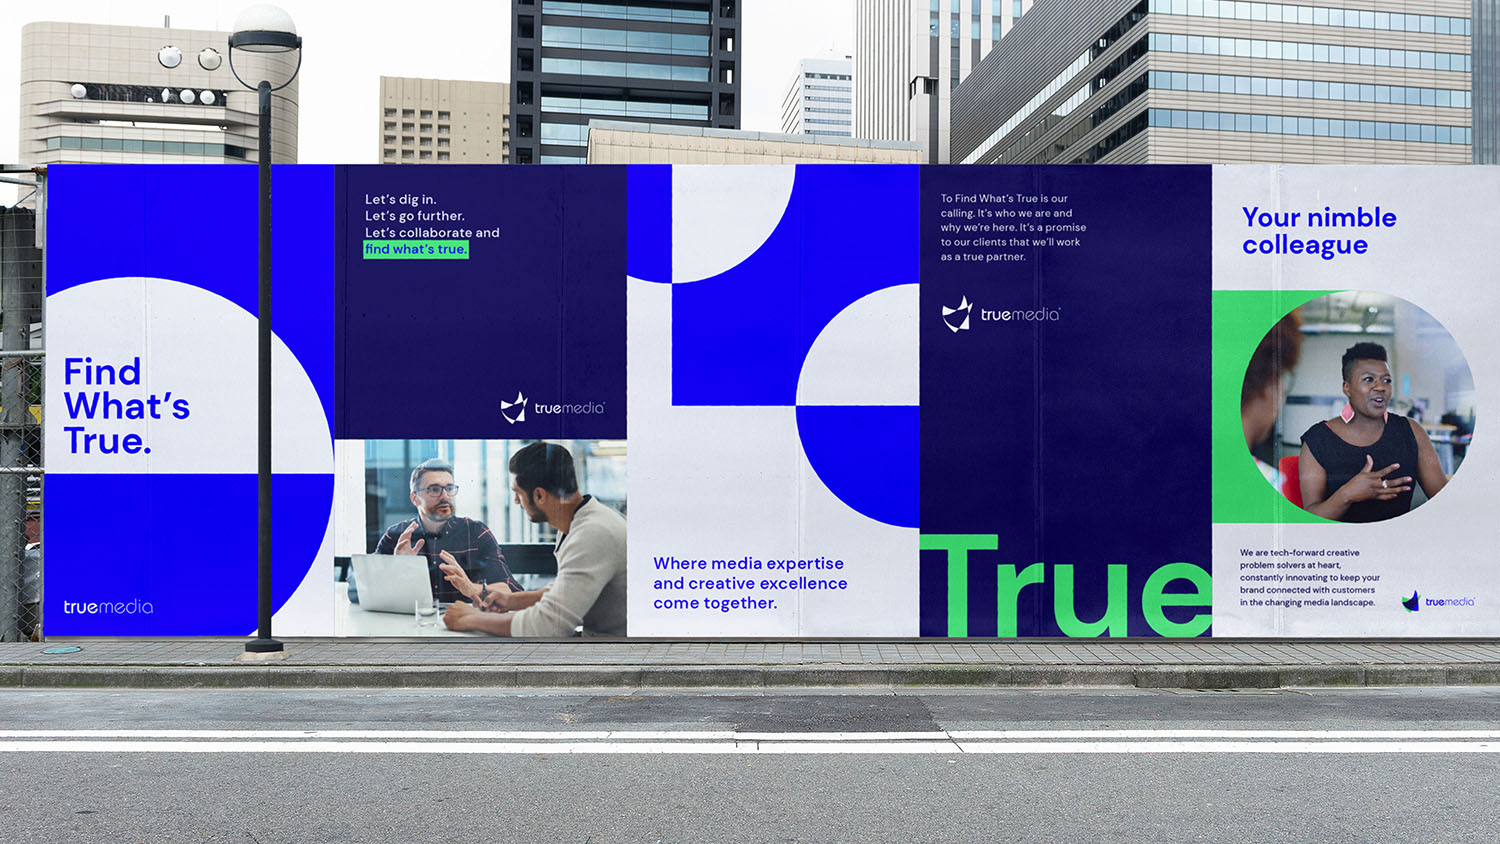 True Media's branding applied to out-of-home advertising